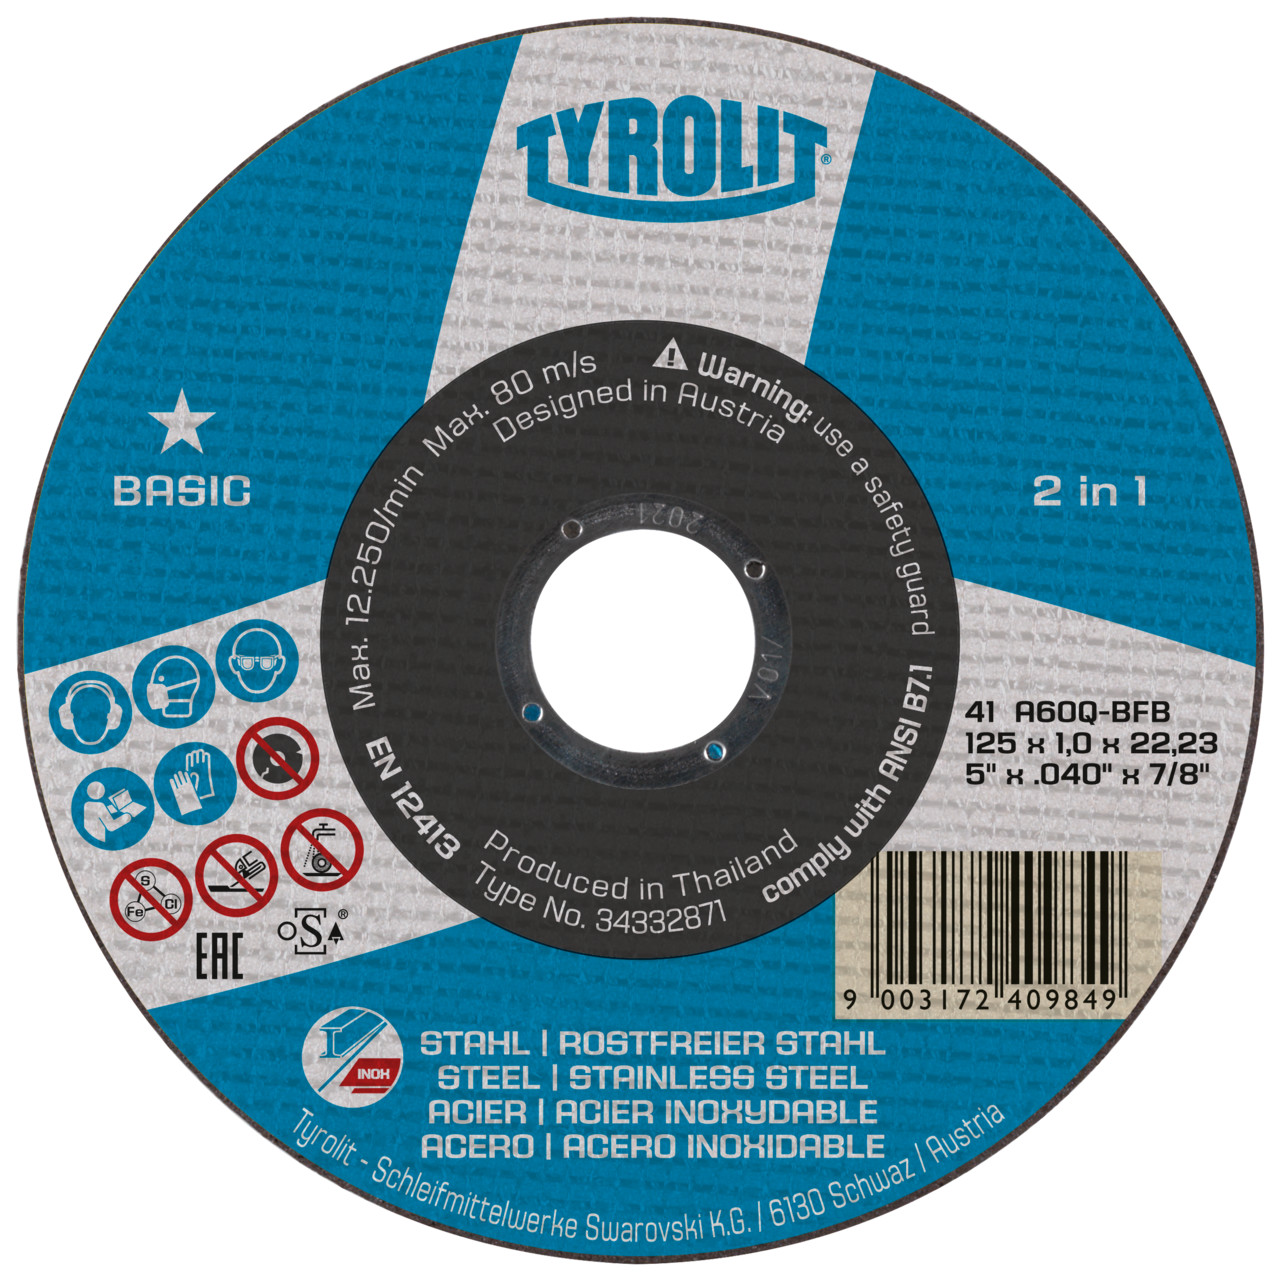 Tyrolit Cutting discs DxDxH 150x1.6x22.23 2in1 for steel and stainless steel, shape: 41 - straight version, Art. 34332874